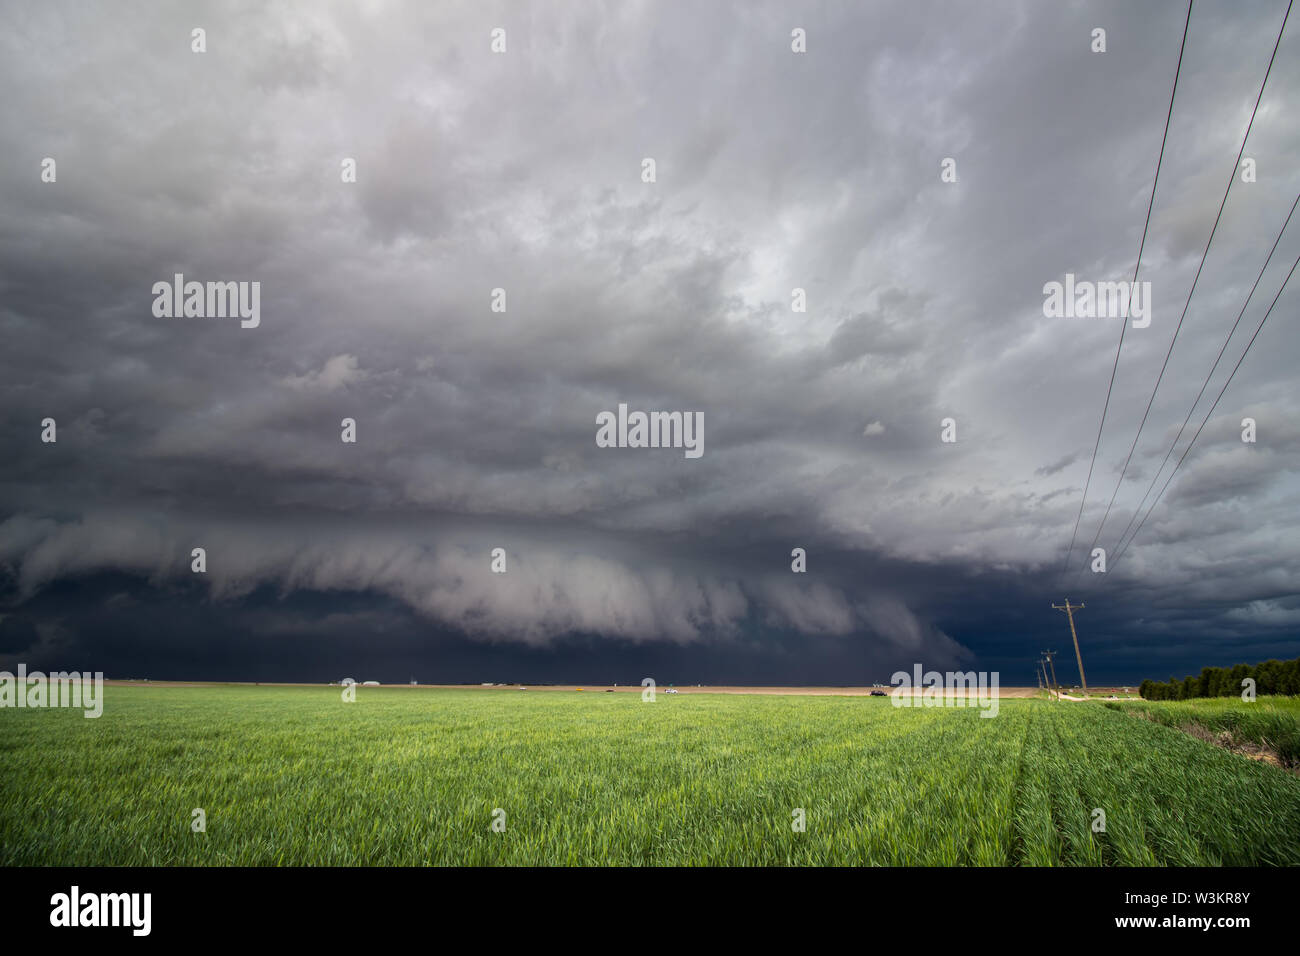 A low shelf cloud and severe storm approaches over farm country. Stock Photo